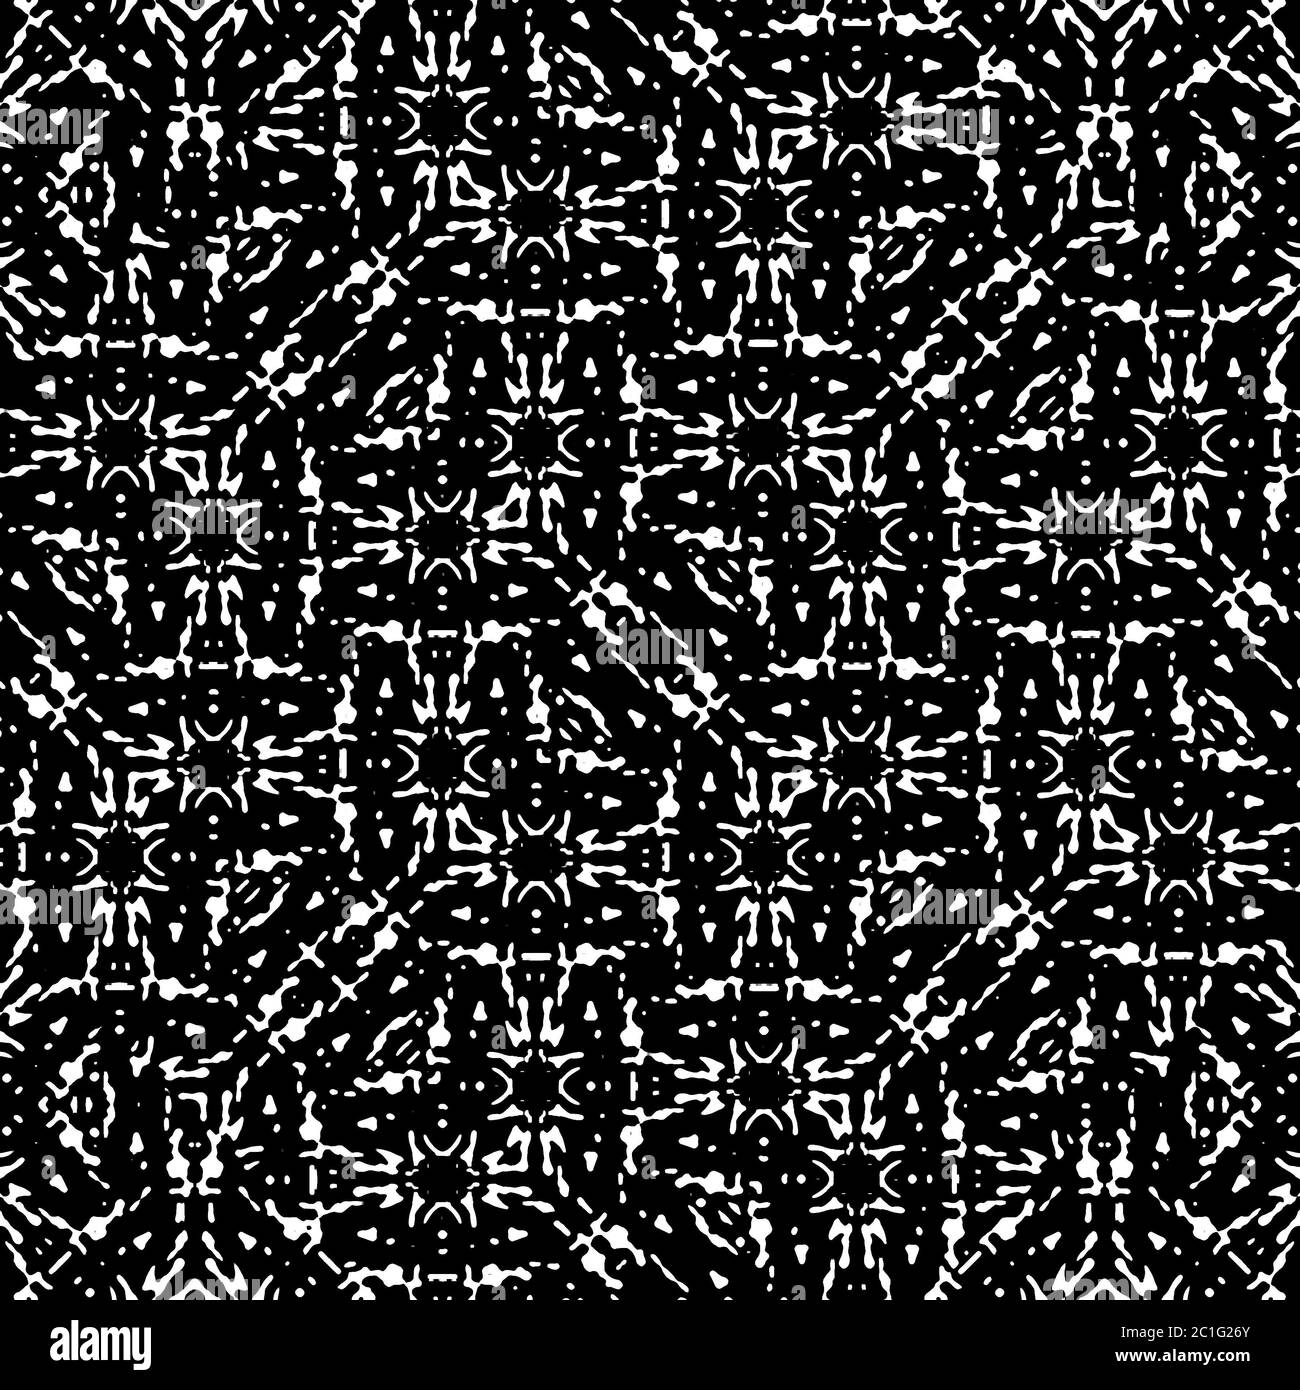 Black and White Abstract Seamless Pattern Stock Photo